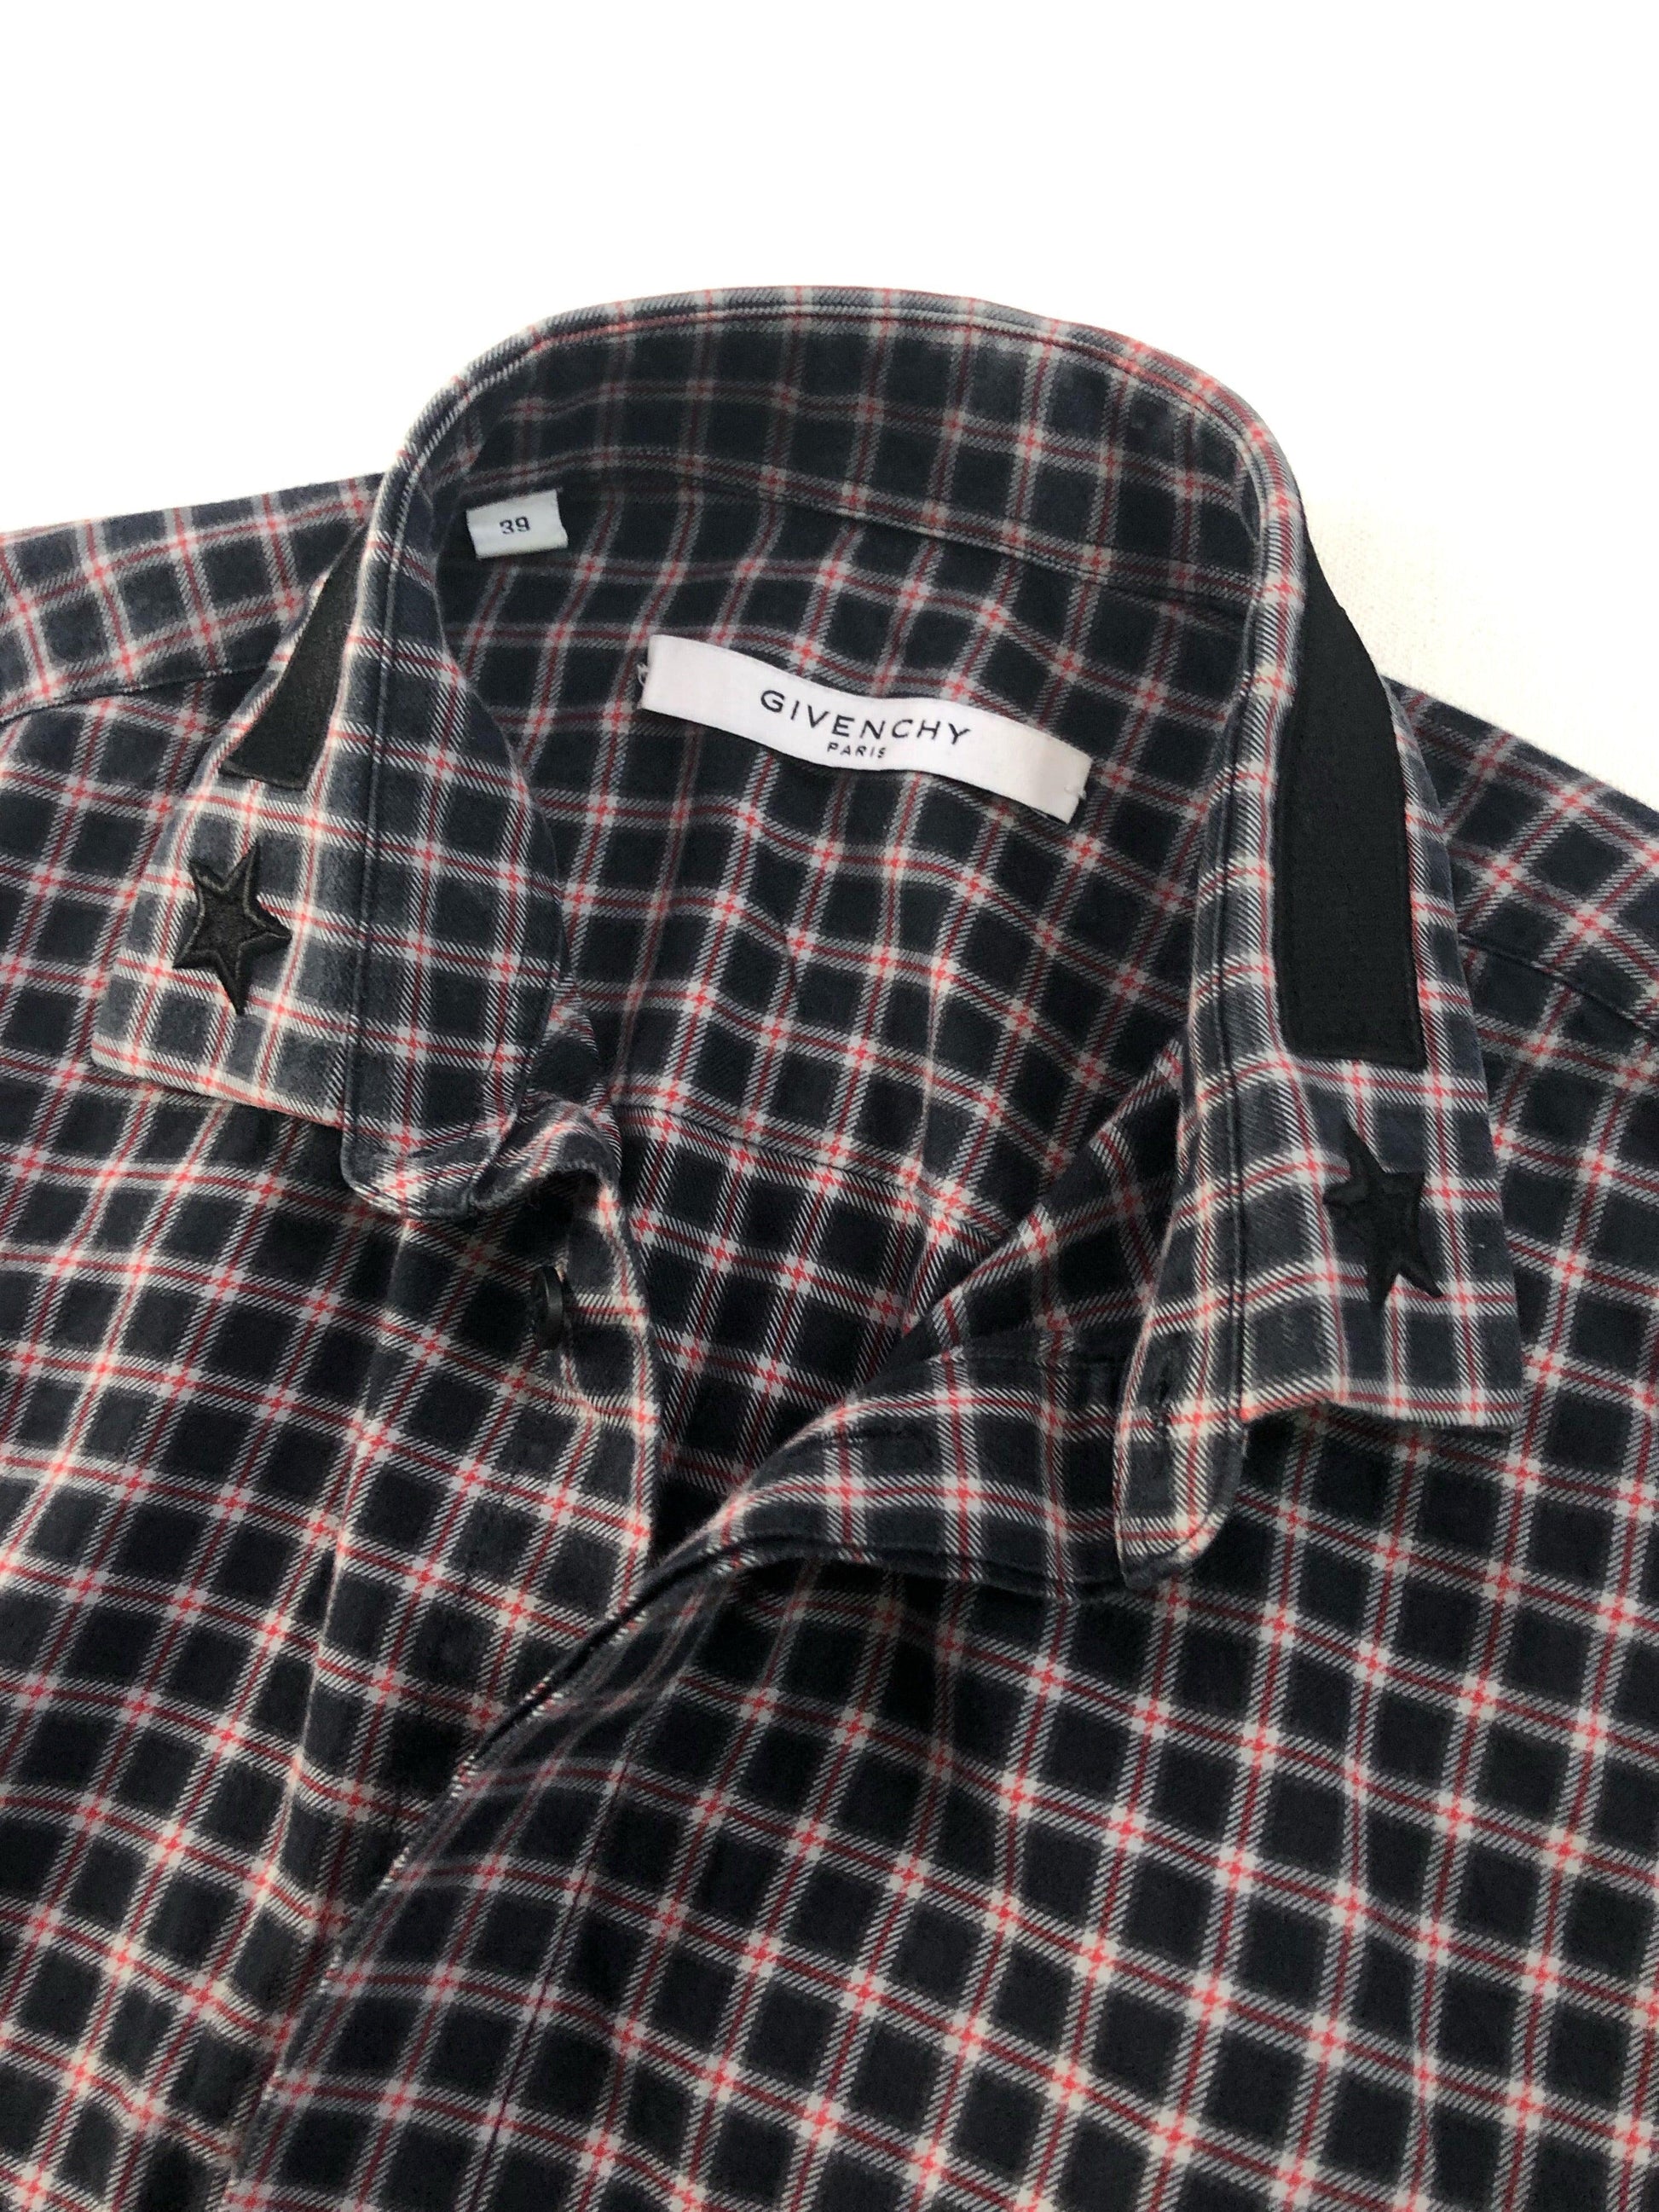 Givenchy red and black collar star flannel top - Known Source